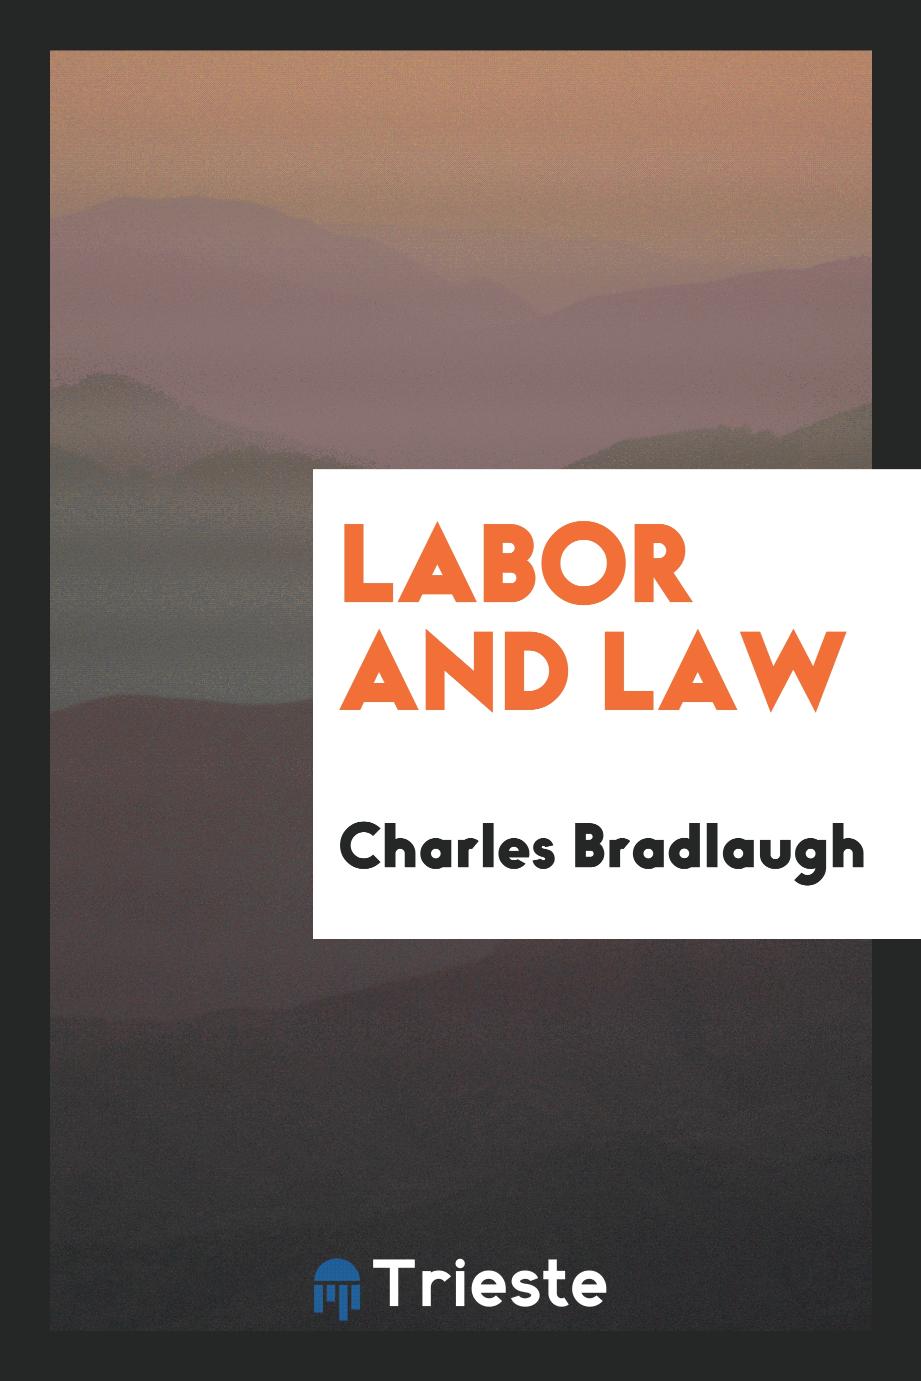 Labor and law